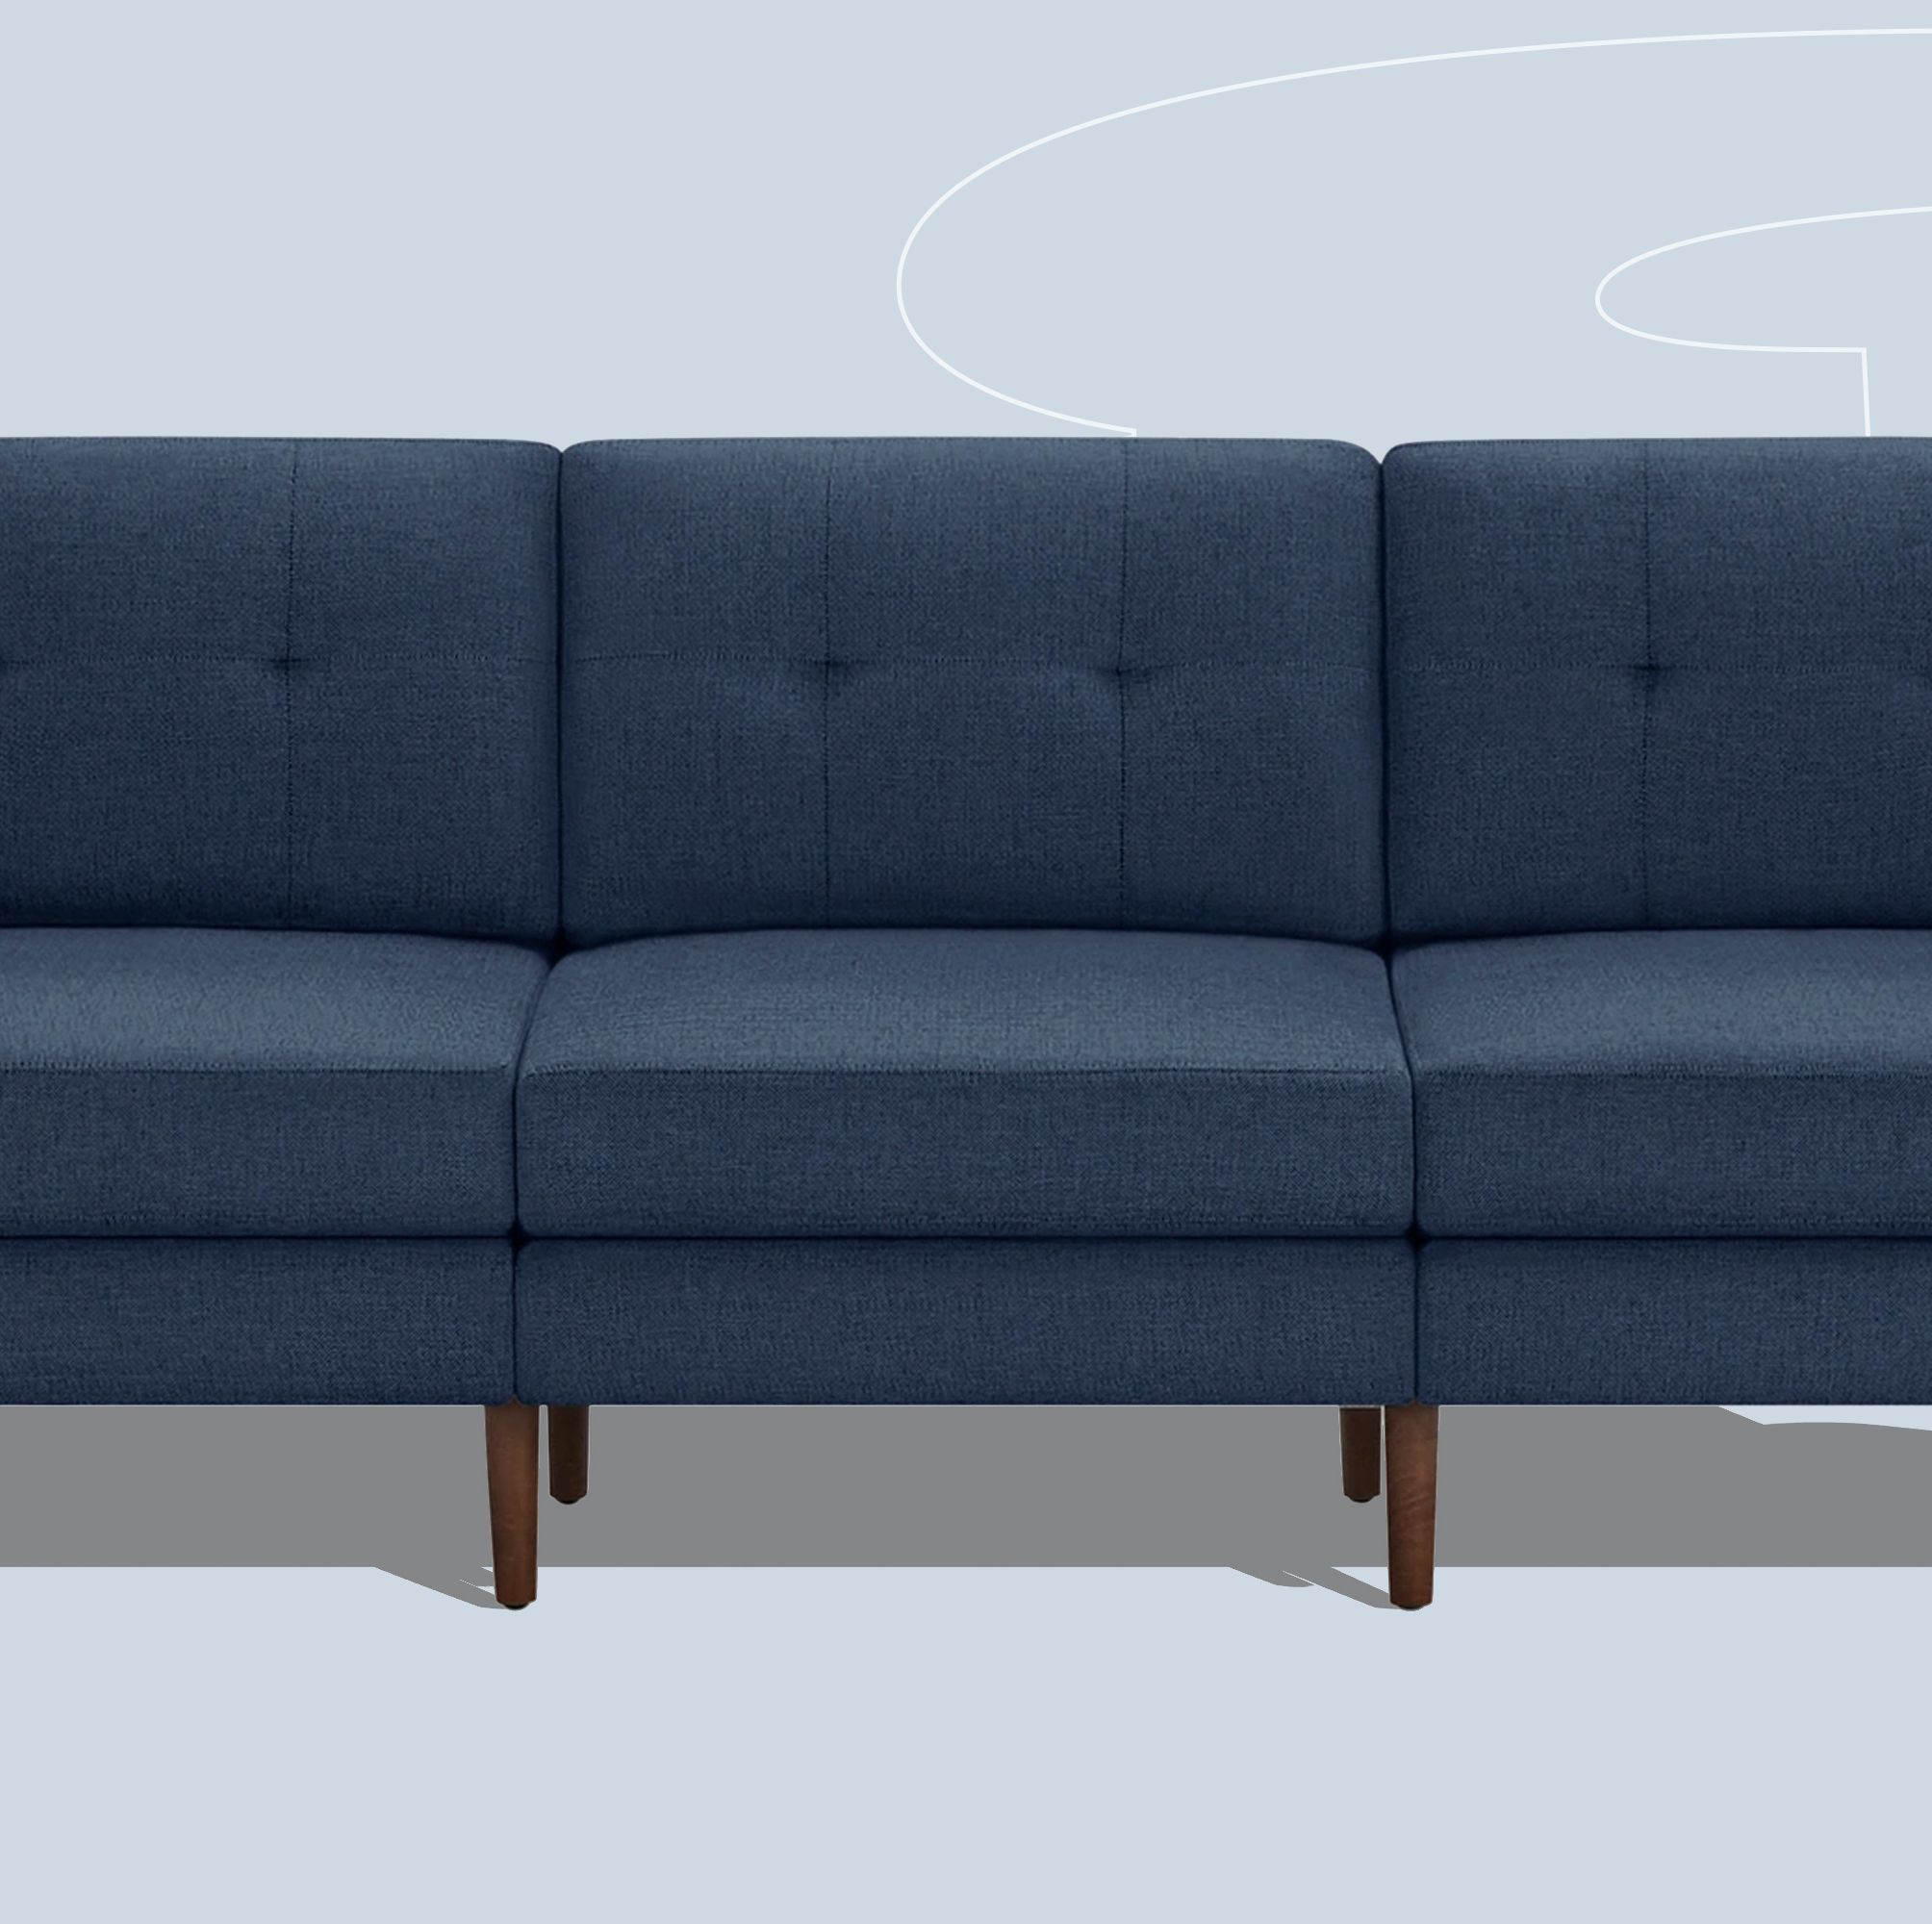 It's Time For a New Sofa—and Burrow's Spring Sale Has You Covered